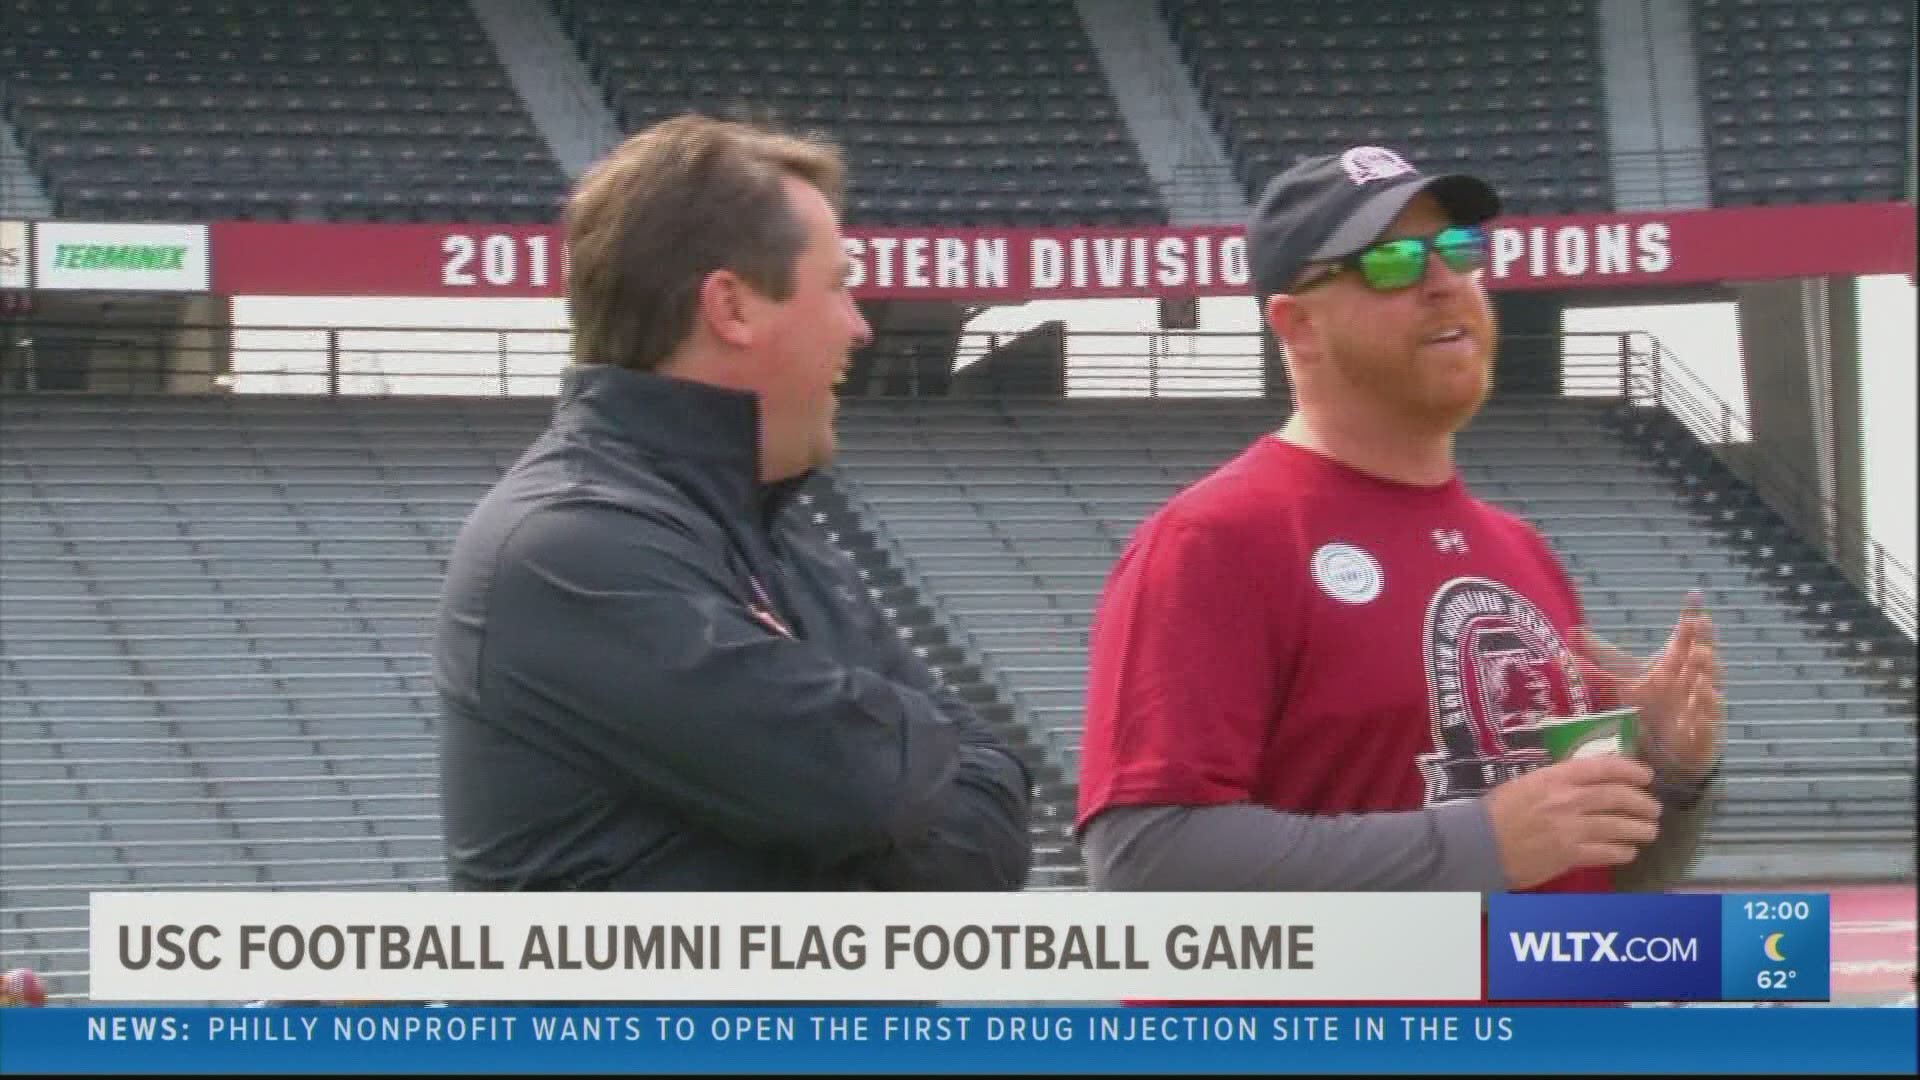 USC football legends return to Williams Brice stadium to compete one more time in the annual Alumni Flag Football Game which kicks off South Carolina's Spring Game.